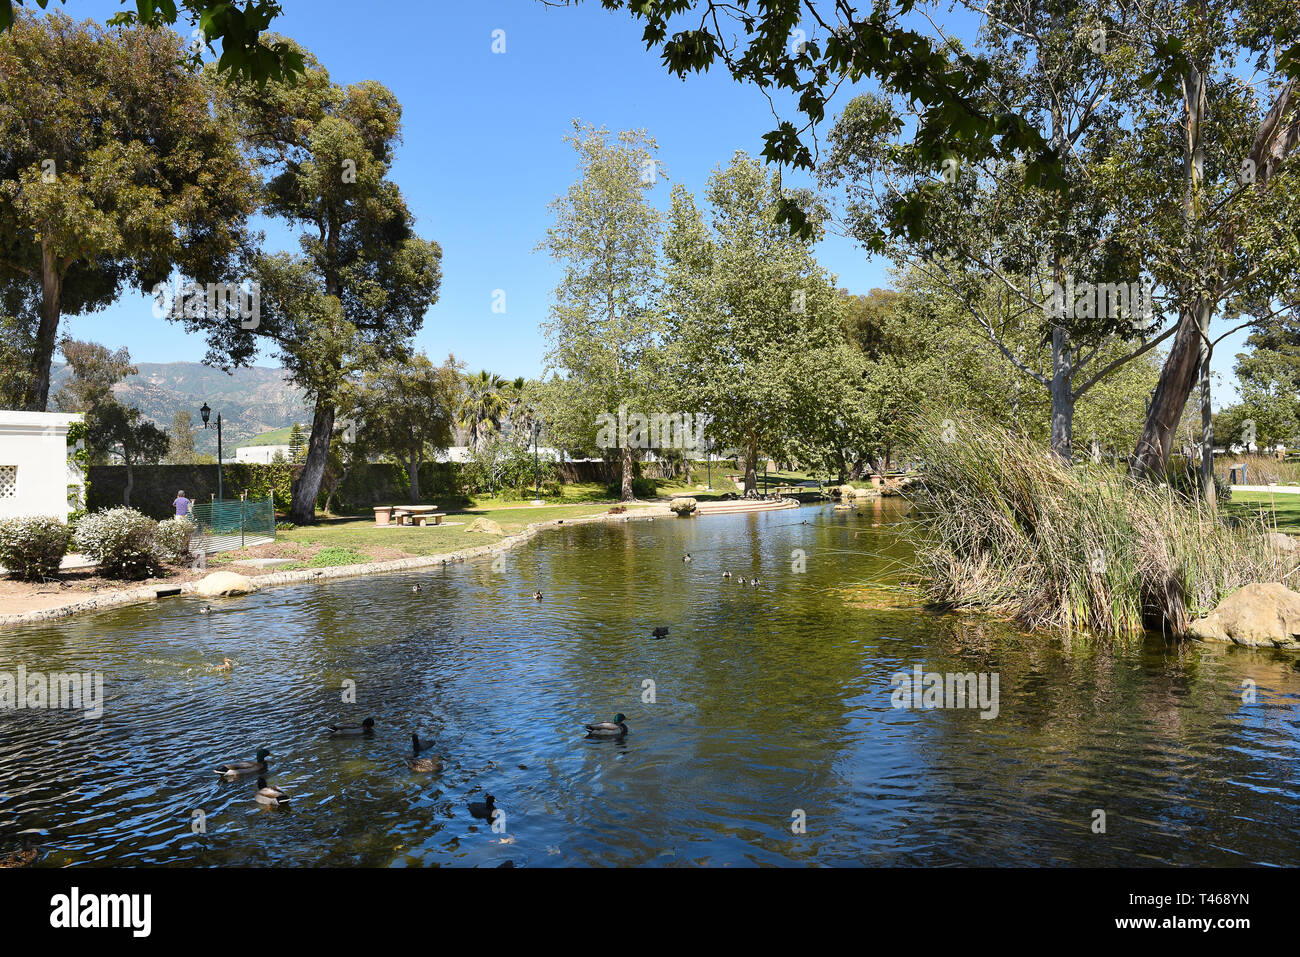 SANTA BARBARA, CALIFORNIA - APRIL 11, 2019: Pond at Chase Palm Park. A public park along the waterfront with play areas, pond, picnic areas and a wedd Stock Photo